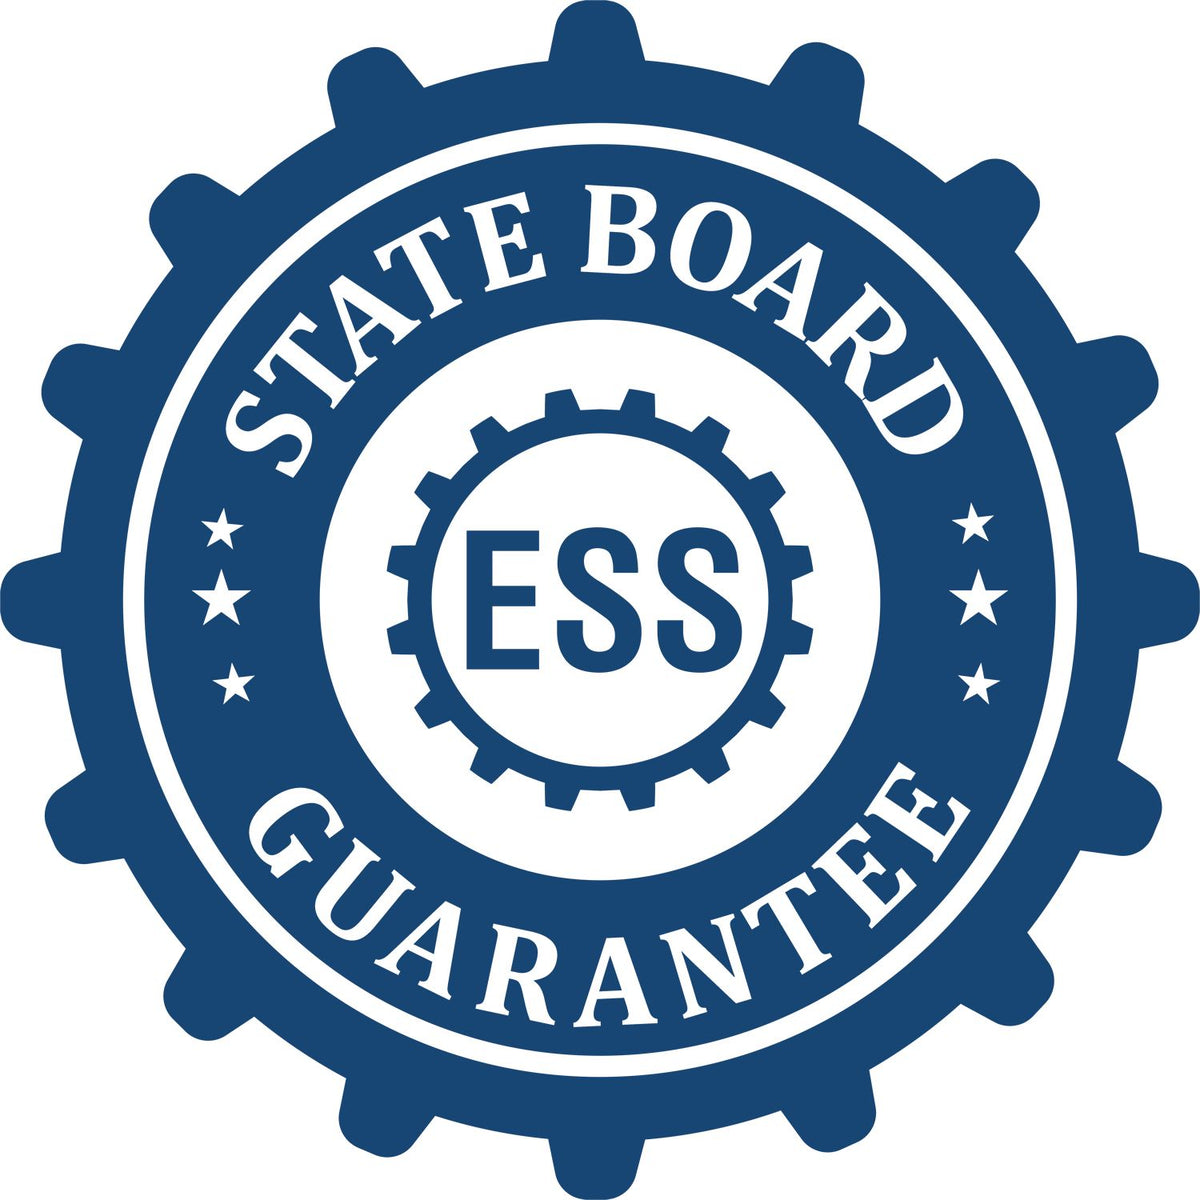 An emblem in a gear shape illustrating a state board guarantee for the Hybrid Indiana Landscape Architect Seal